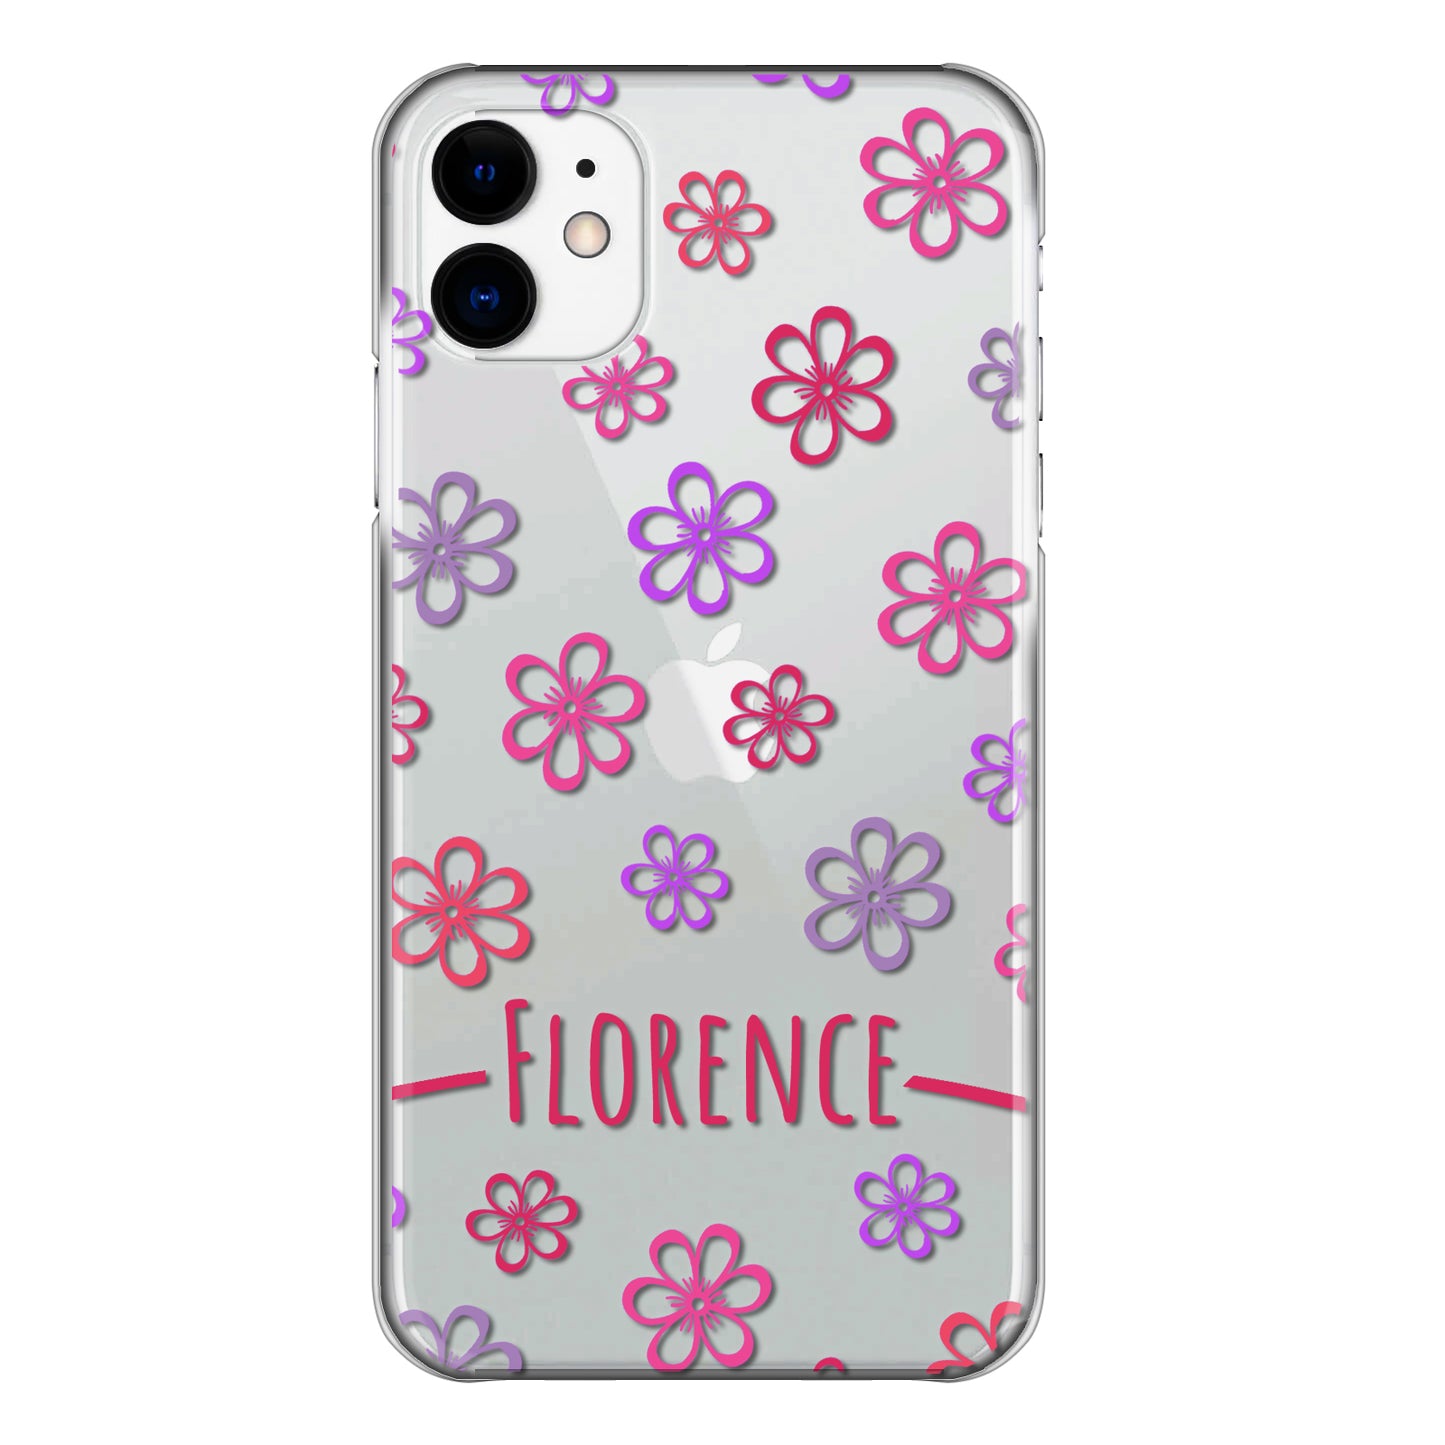 Personalised Huawei Phone Hard Case with Colourful Flowers and Cute Pink Text